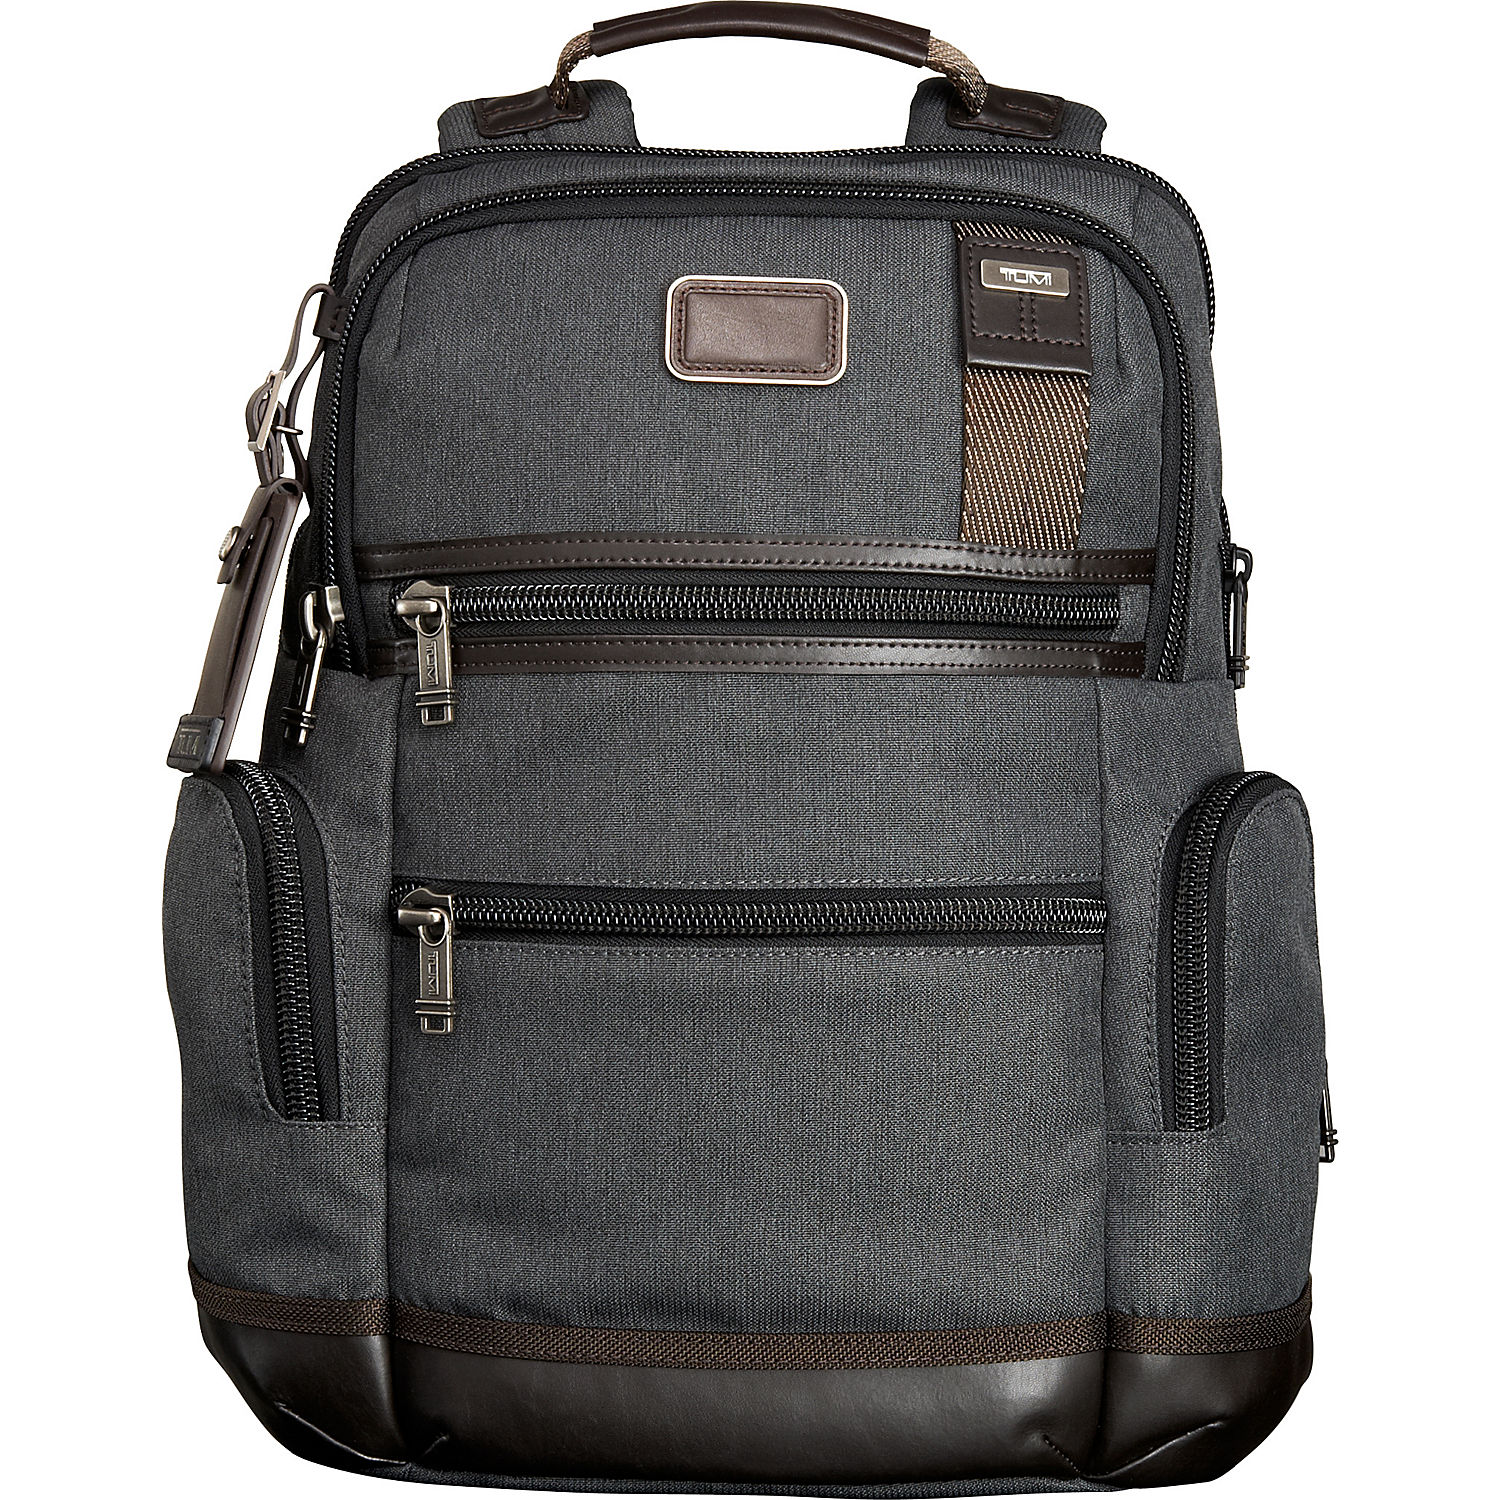 Tumi Backpack Purse. TUMI - Voyageur Carson Laptop Backpack - 15 Inch ...